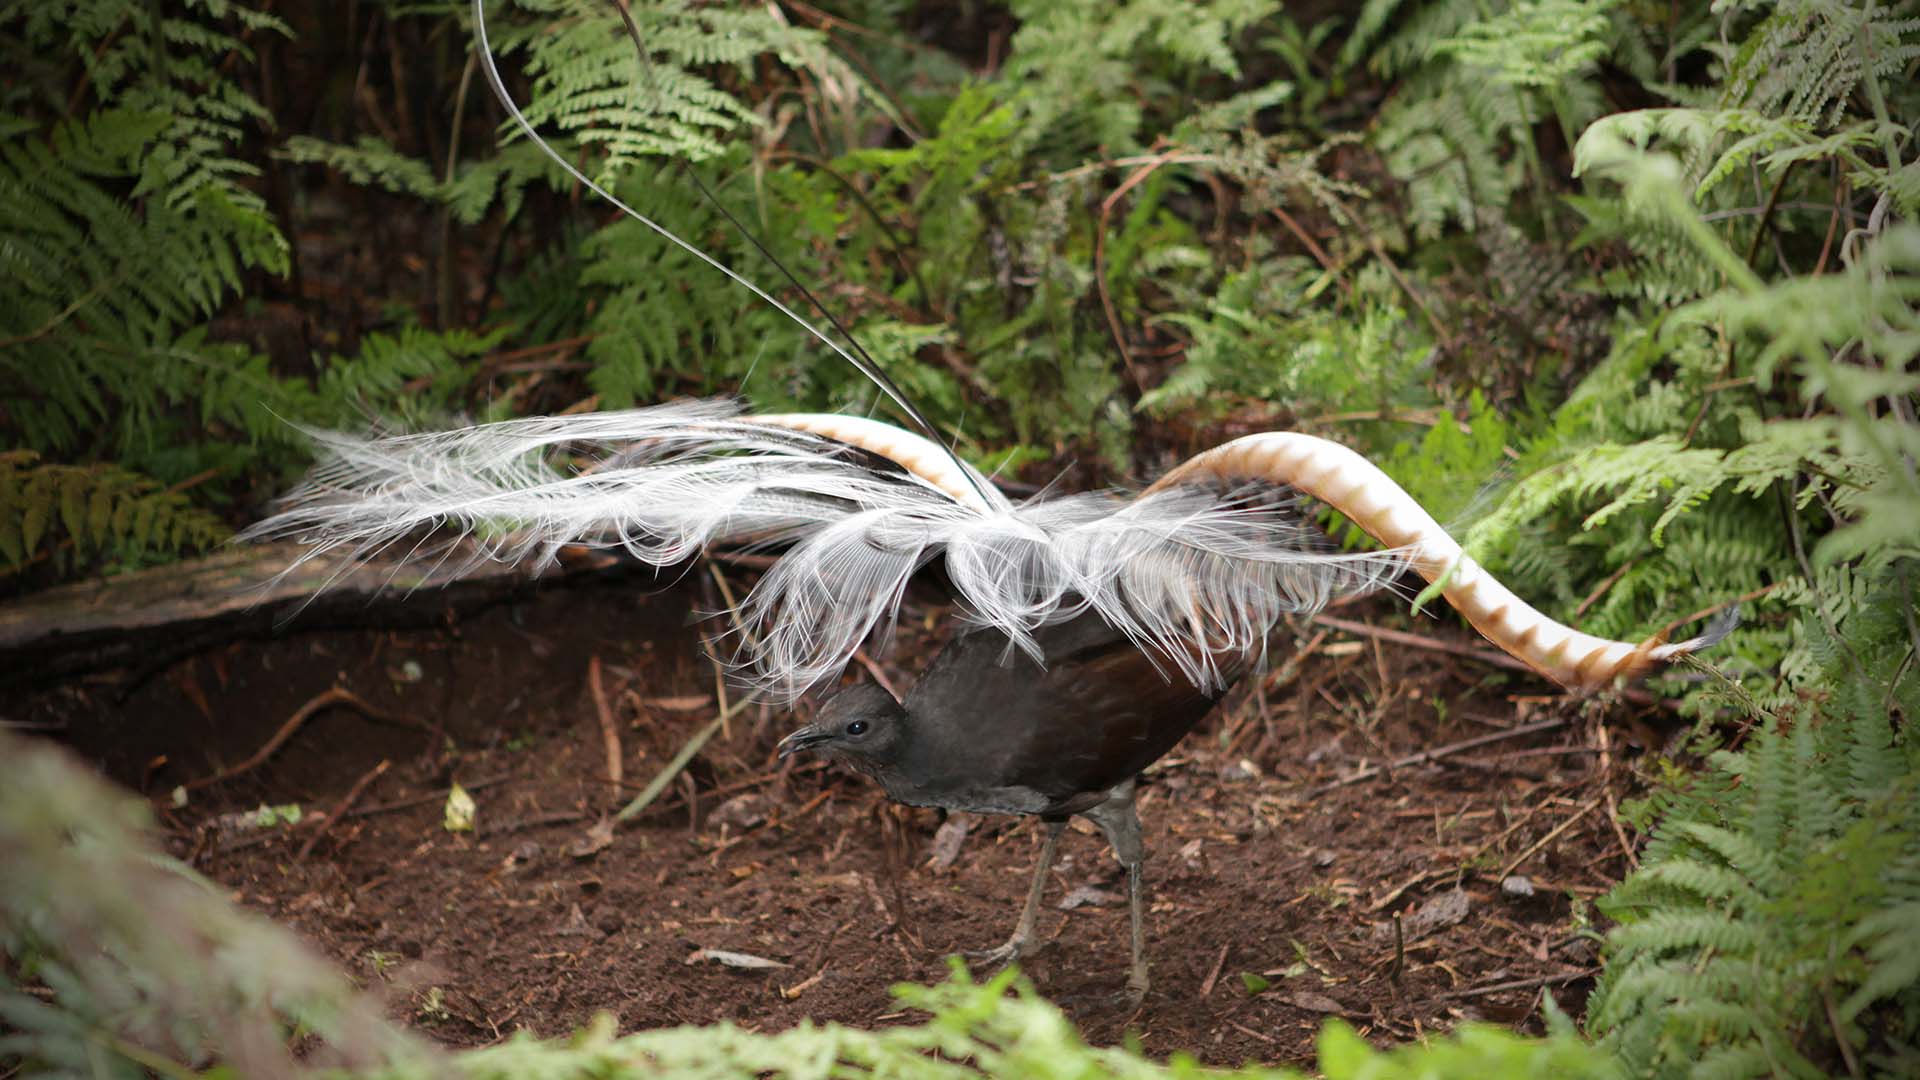 Revealed: The mysterious sex dance of lyrebirds